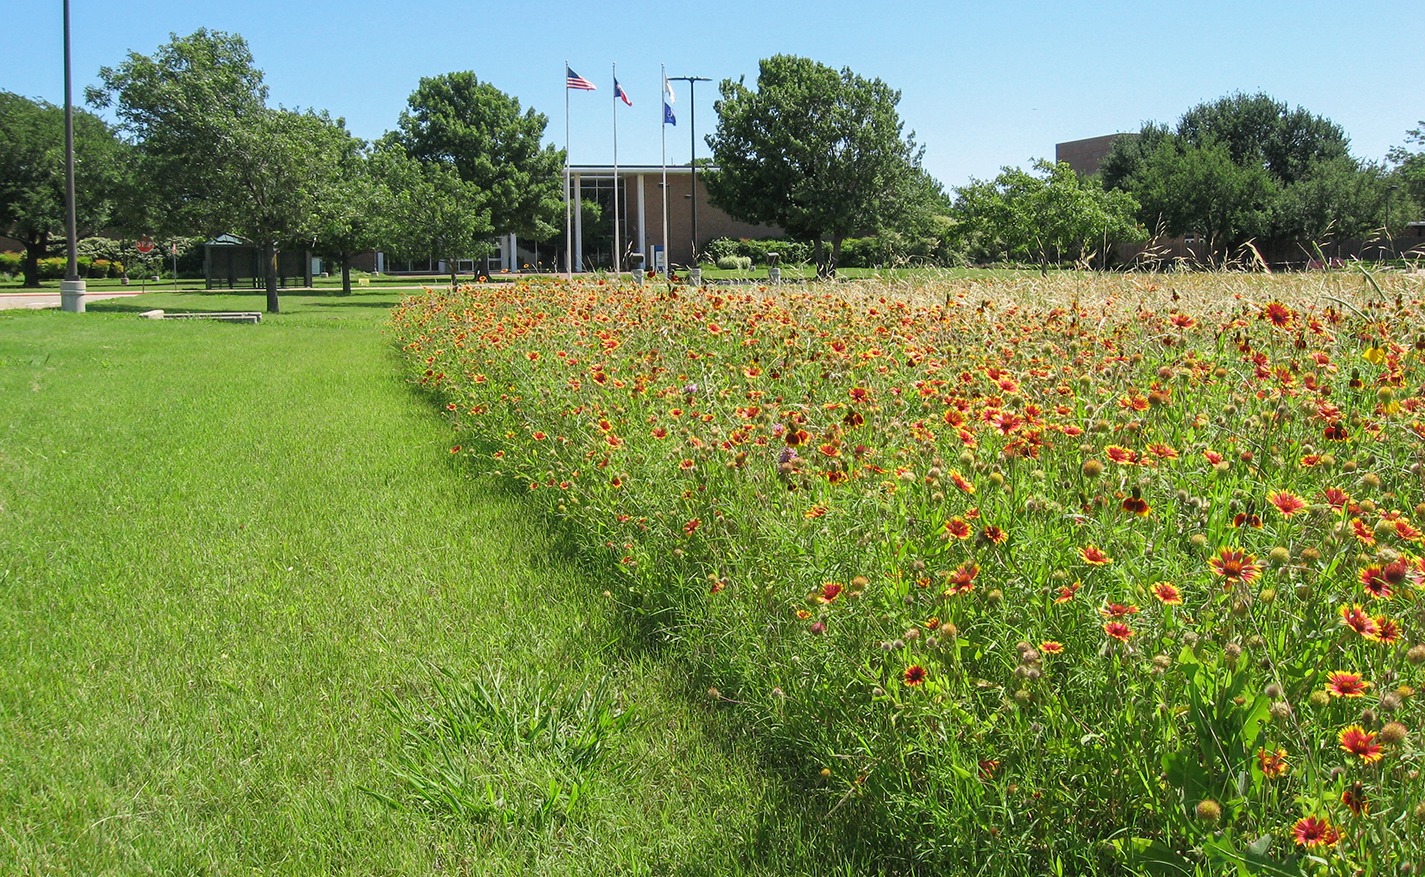 South Campus wants to set aside land to preserve monarch butterflies. The Ecosystem Project is taking steps toward the goal by starting an action group and planting milkweed.